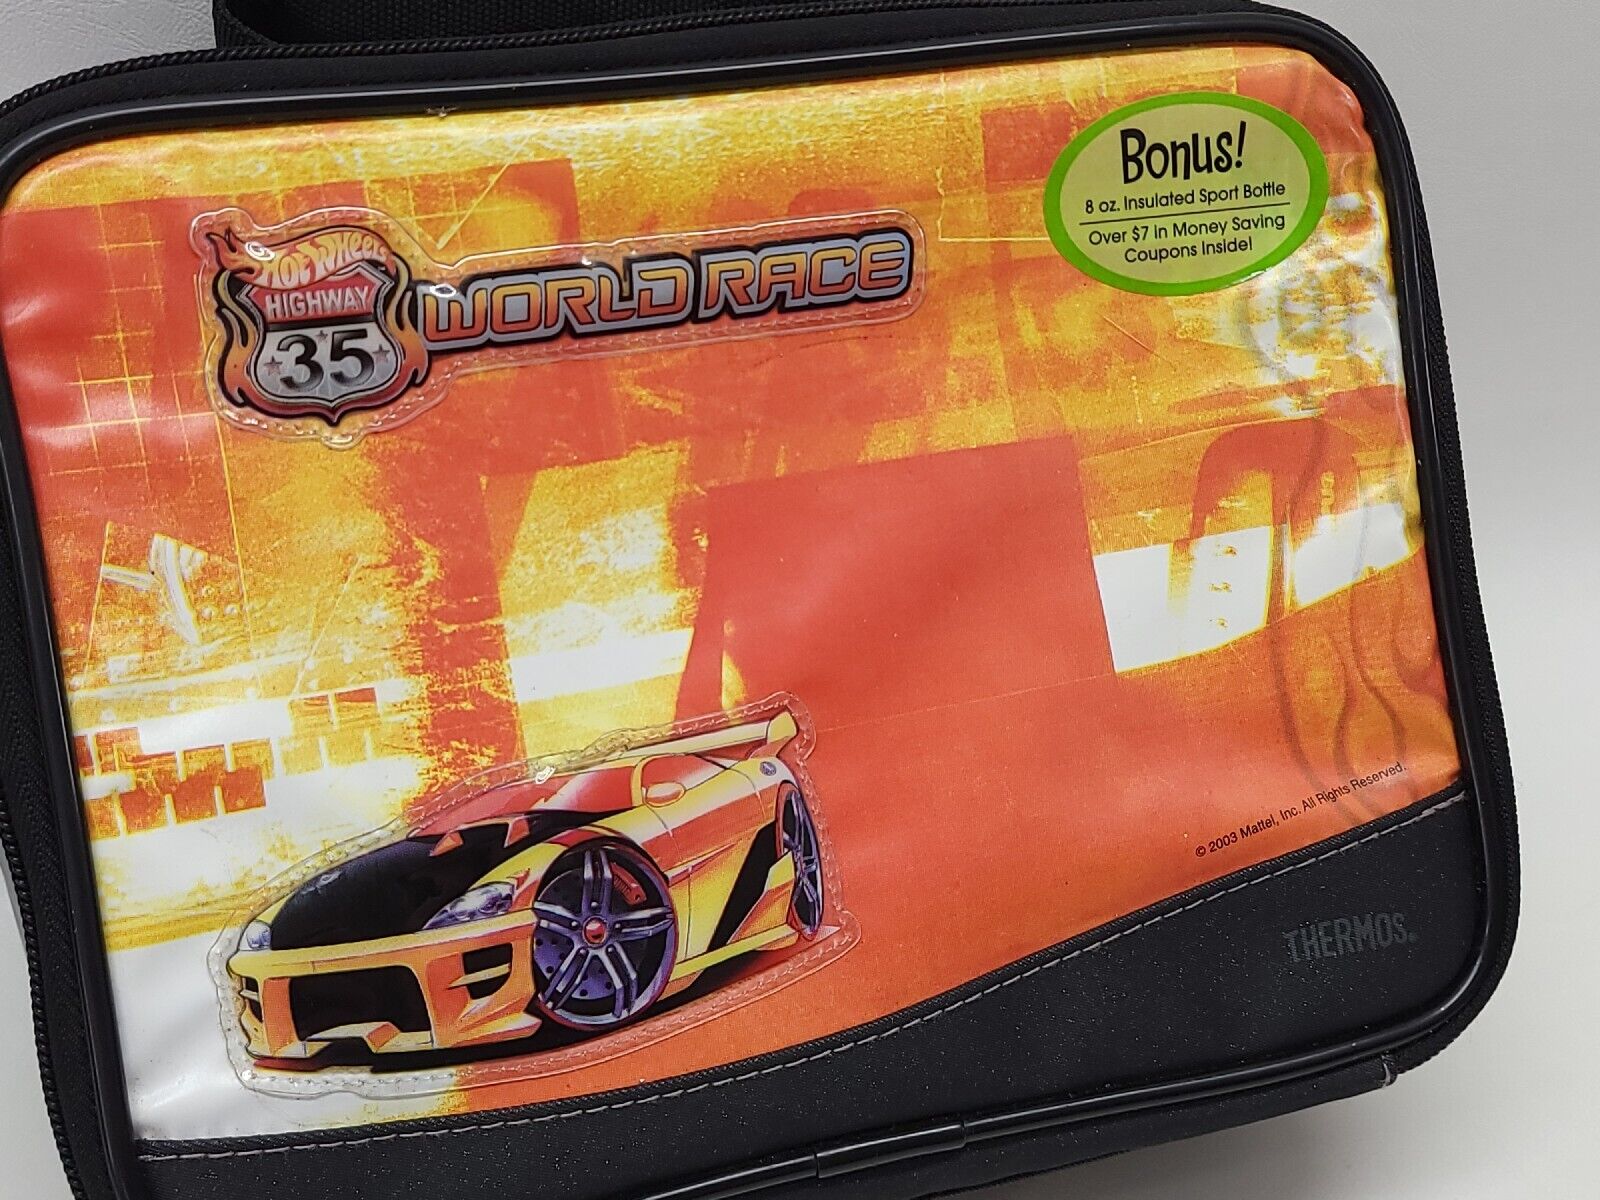 2003 Hot Wheels Highway 35 World Race Soft Kit Lunch Box Thermos NOS W/Tags Rare